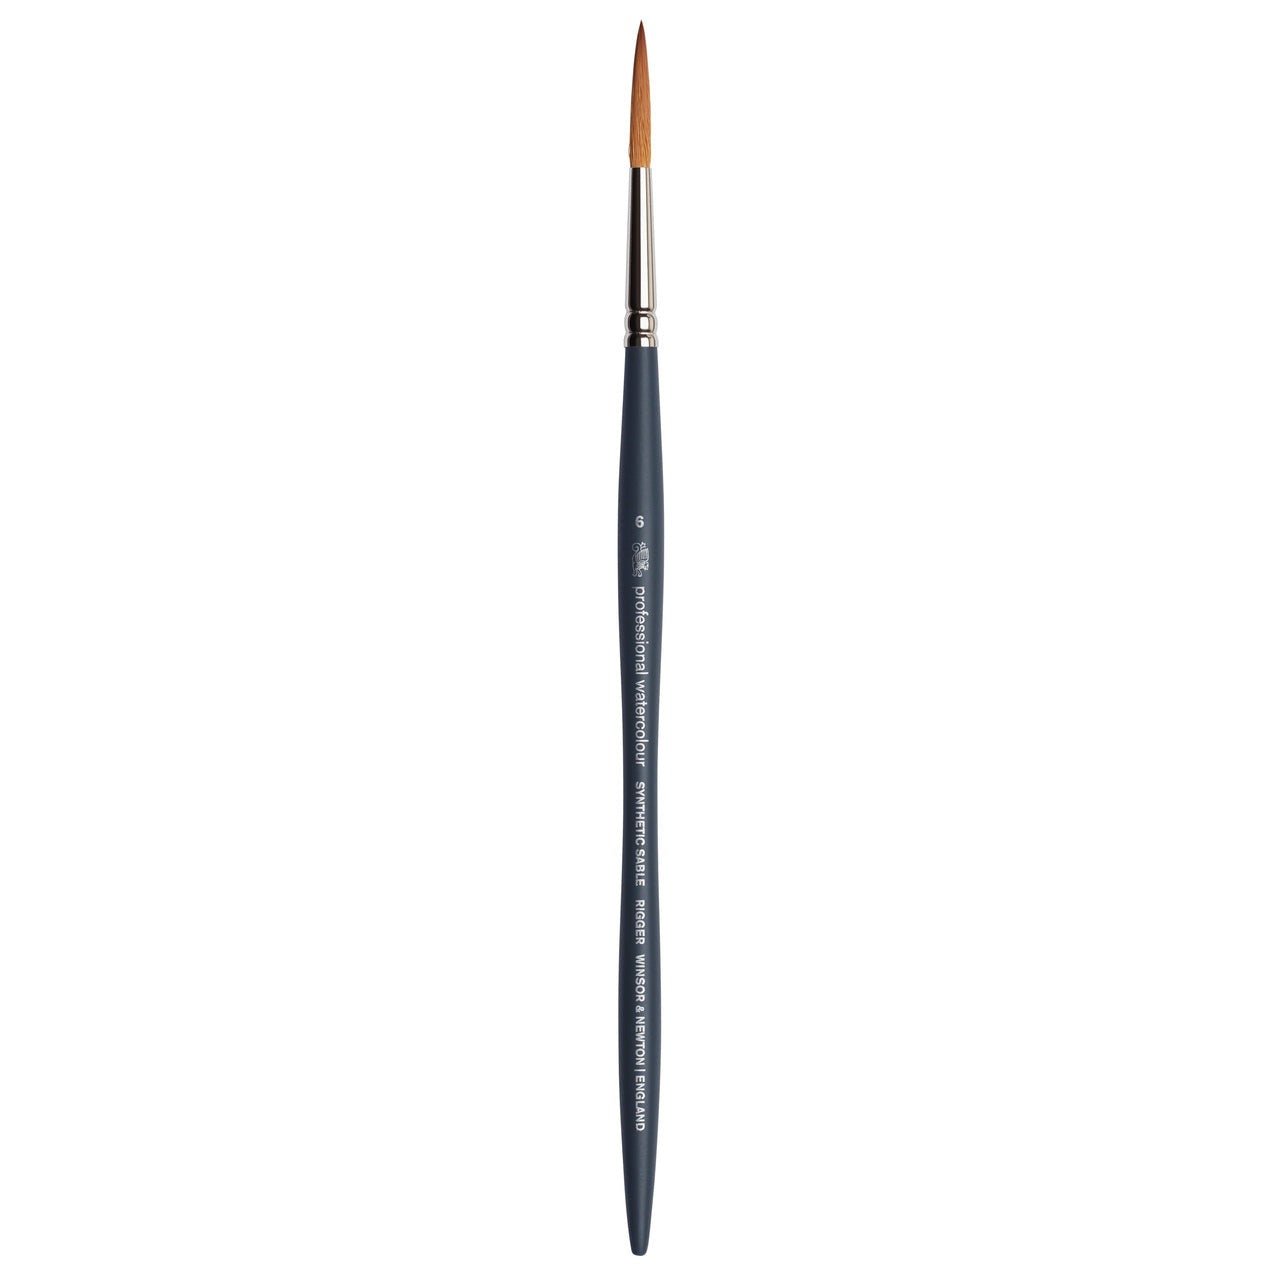 Winsor & Newton Professional Watercolor Synthetic Sable Brush - Rigger 6 - merriartist.com